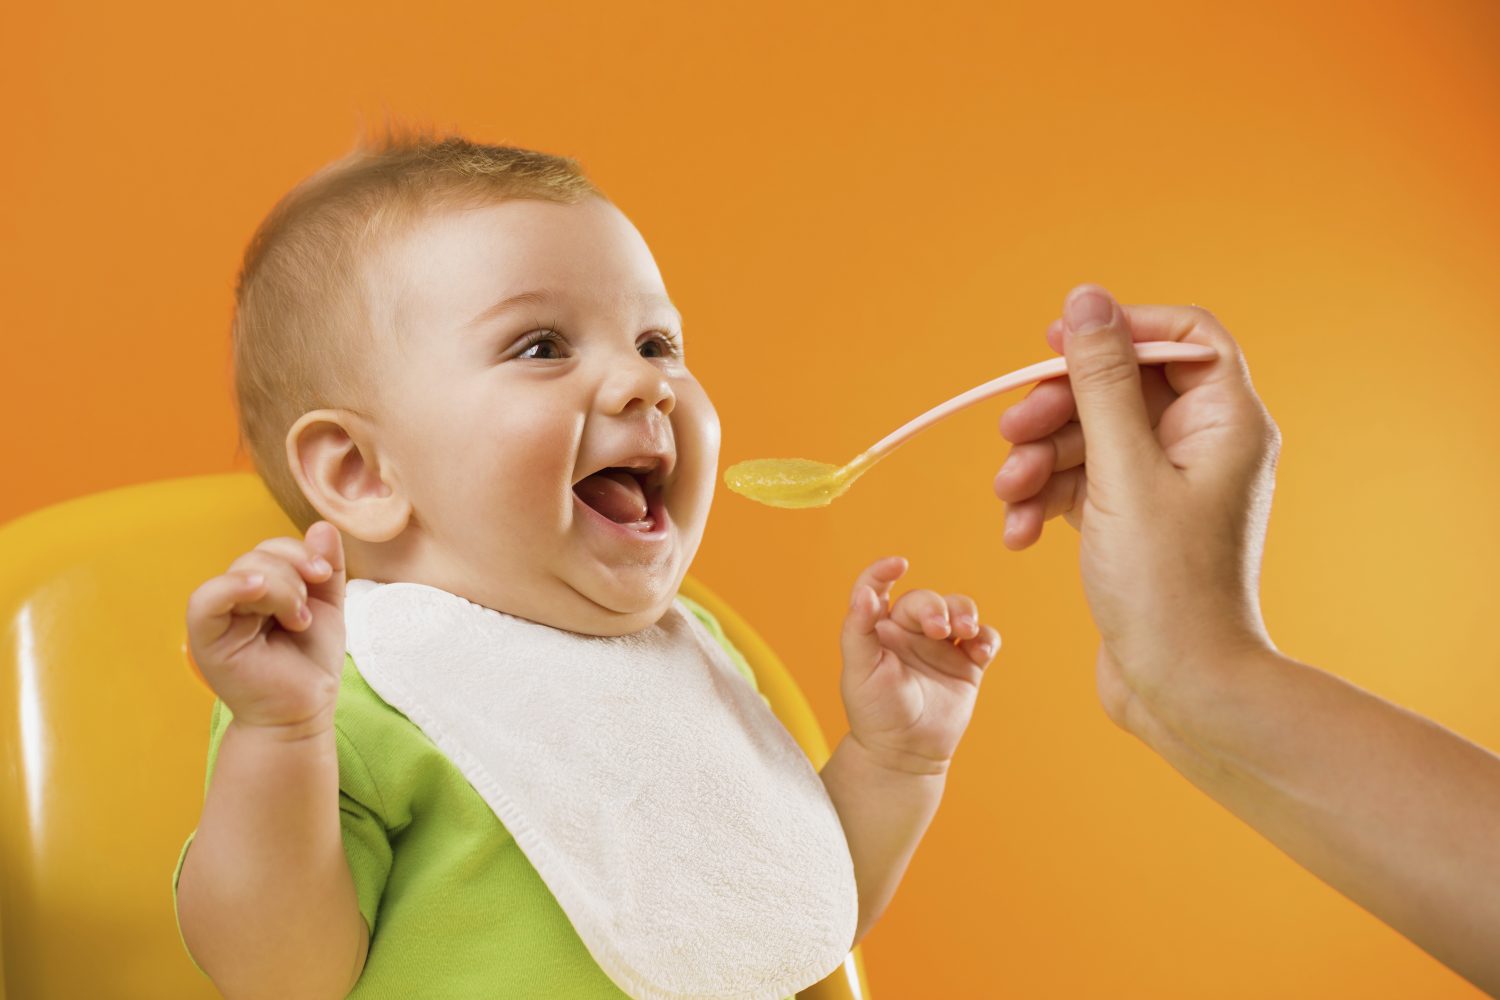 AG Kaul Joins Coalition Urging FDA to Accelerate Actions to Protect Children From Toxic Metals in Baby Food